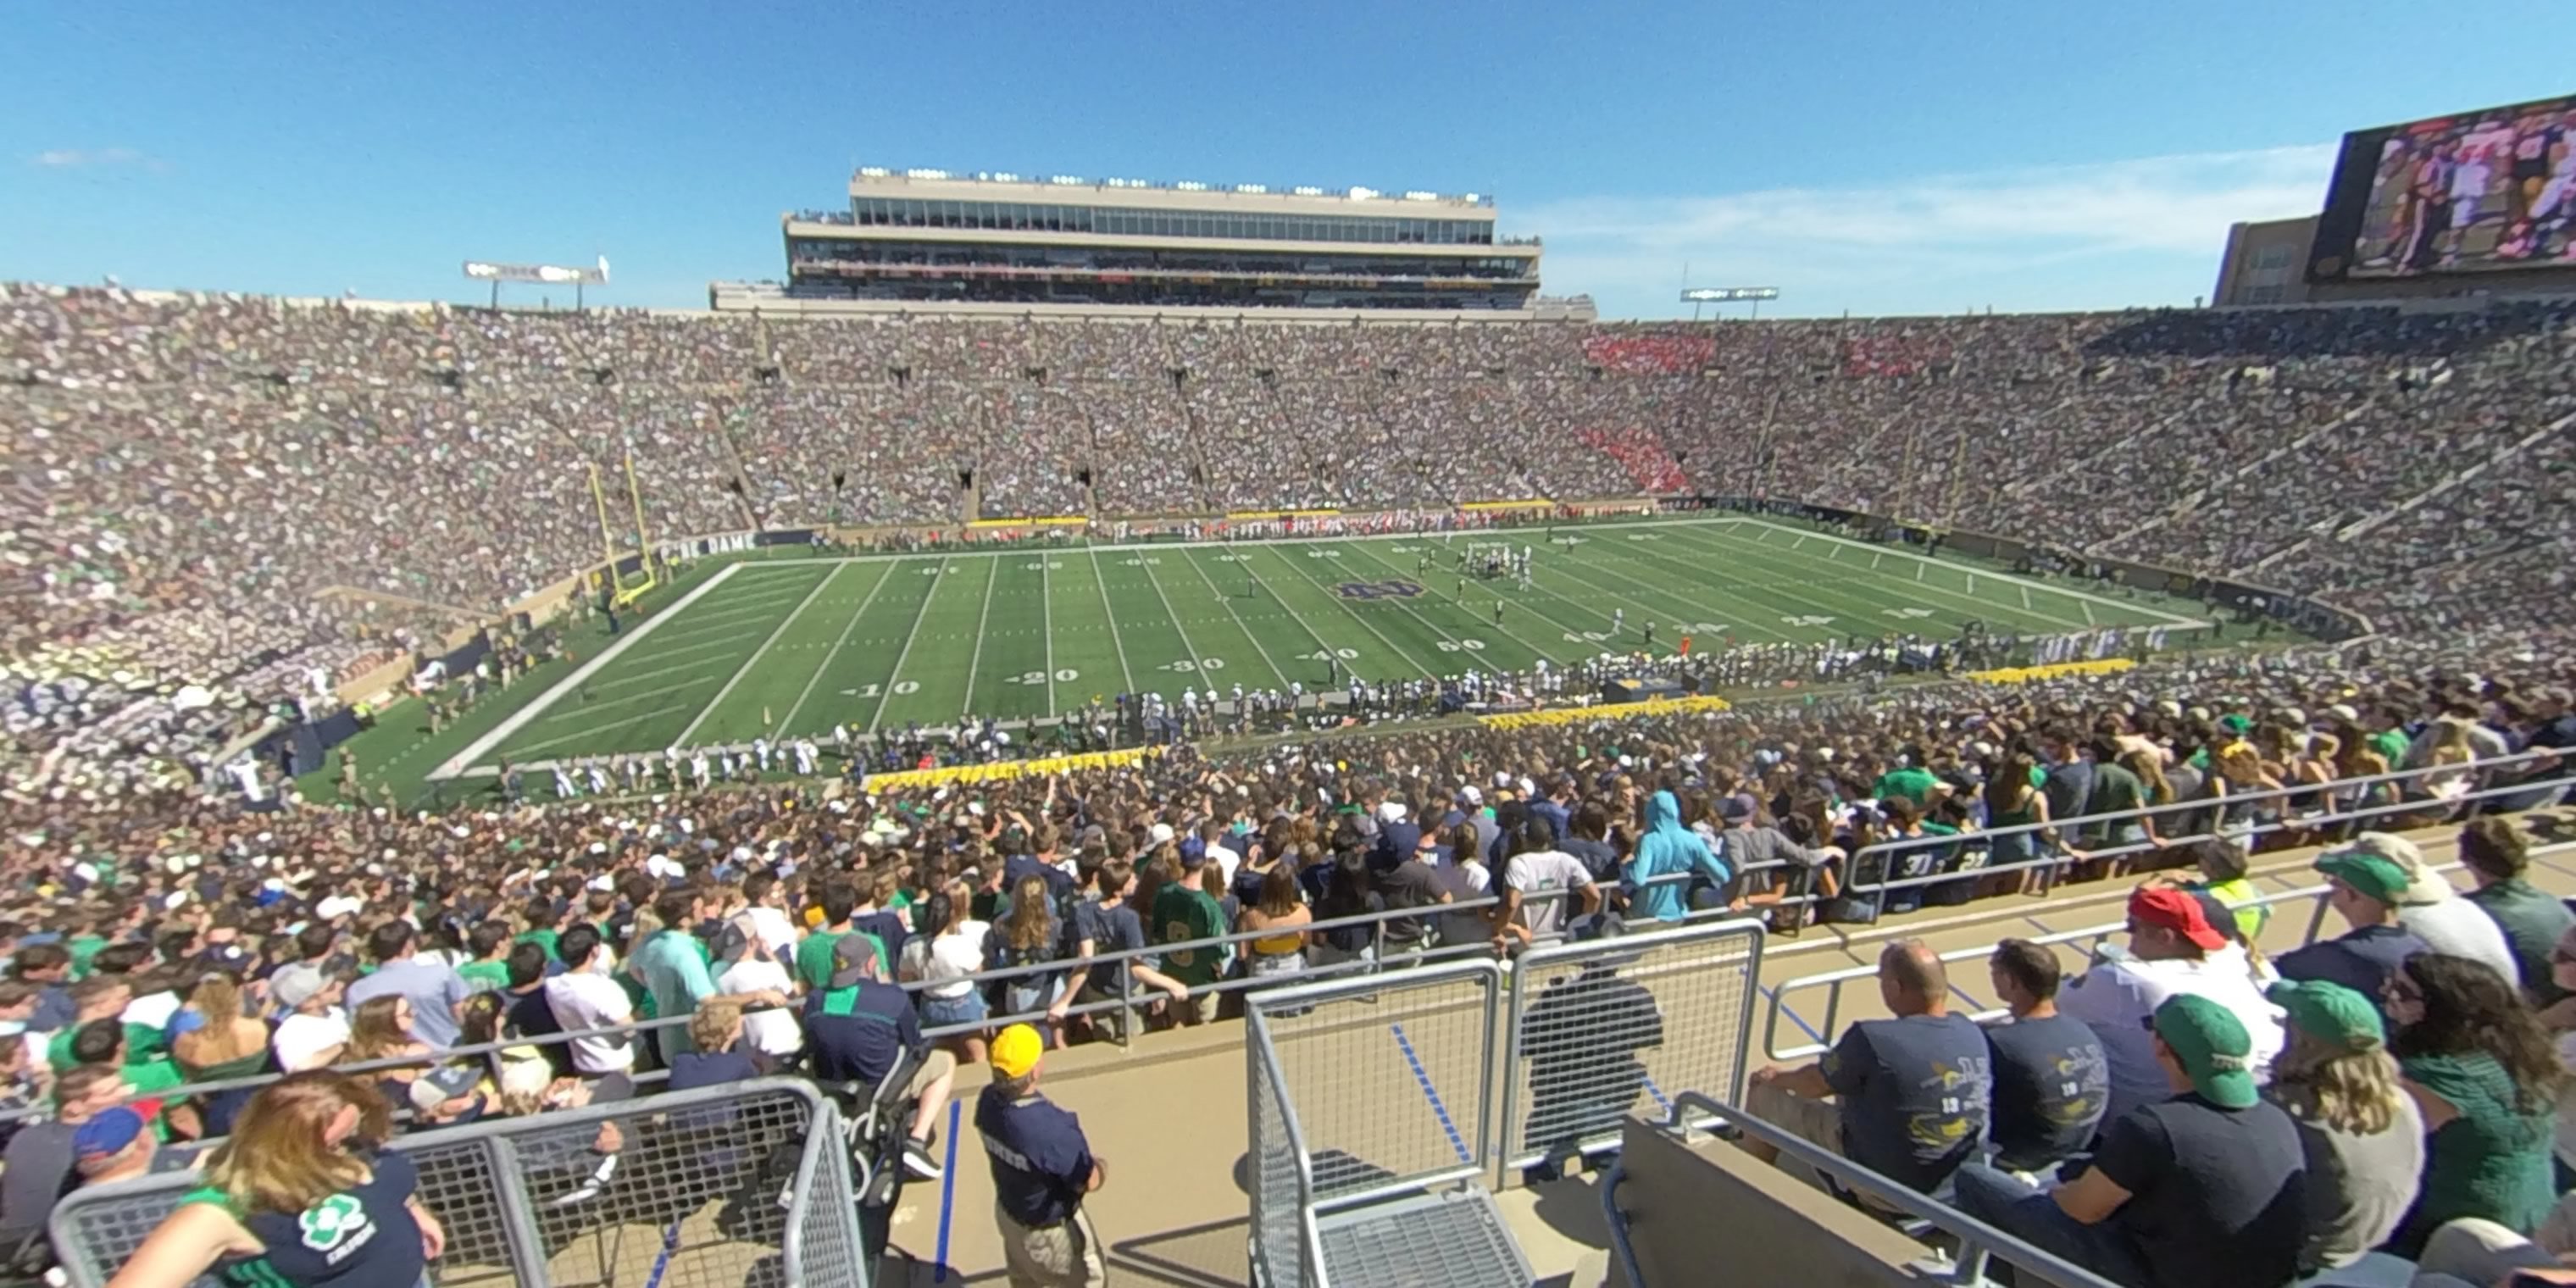 section 129 panoramic seat view  - notre dame stadium